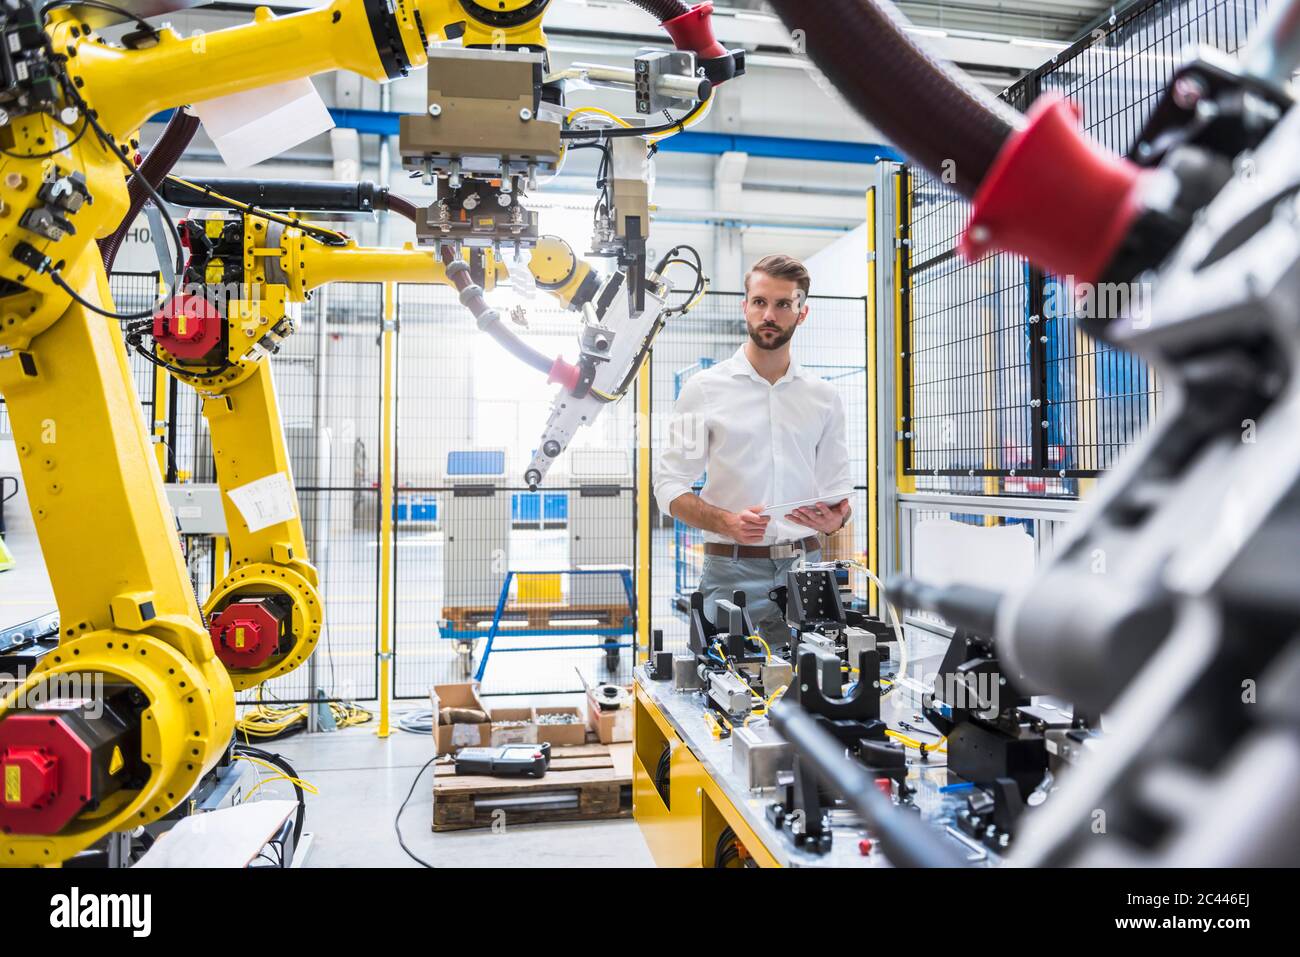 Confident robotics expert looking at machinery in manufacturing factory Stock Photo